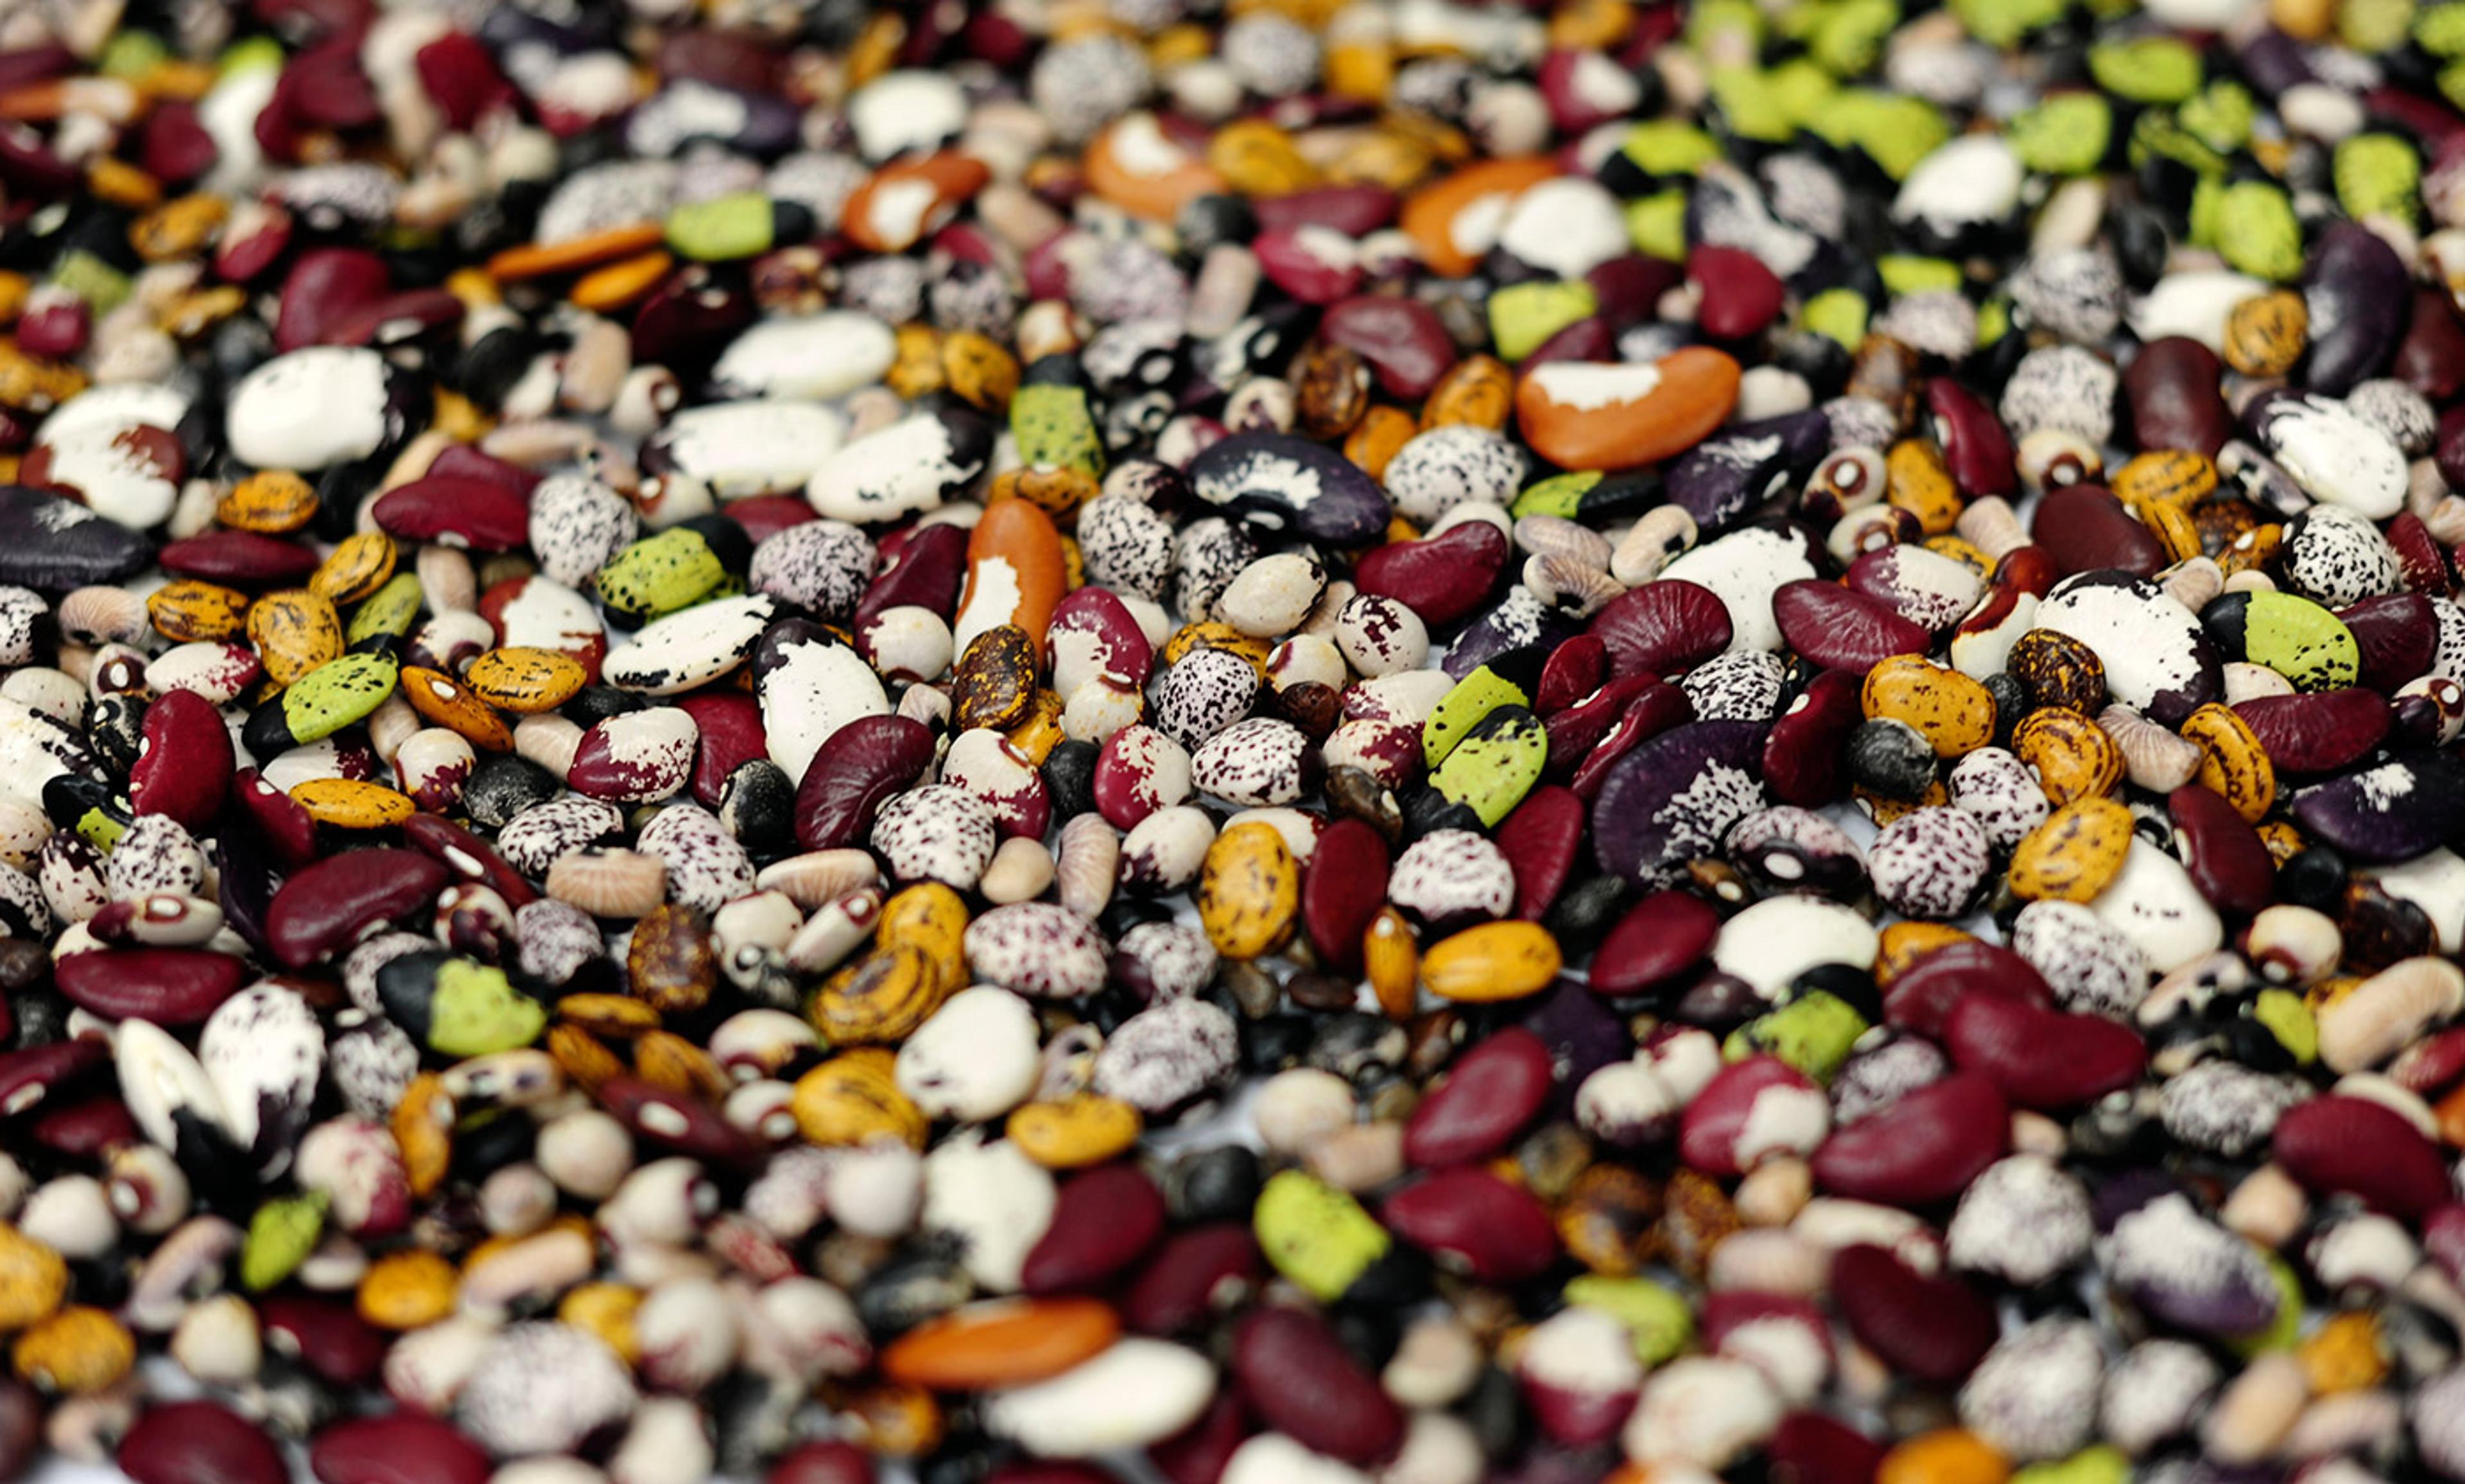 <p>From diverse seeds. Beans at the CIAT genebank in Colombia. <em>Photo by CIAT/Flickr </em></p>